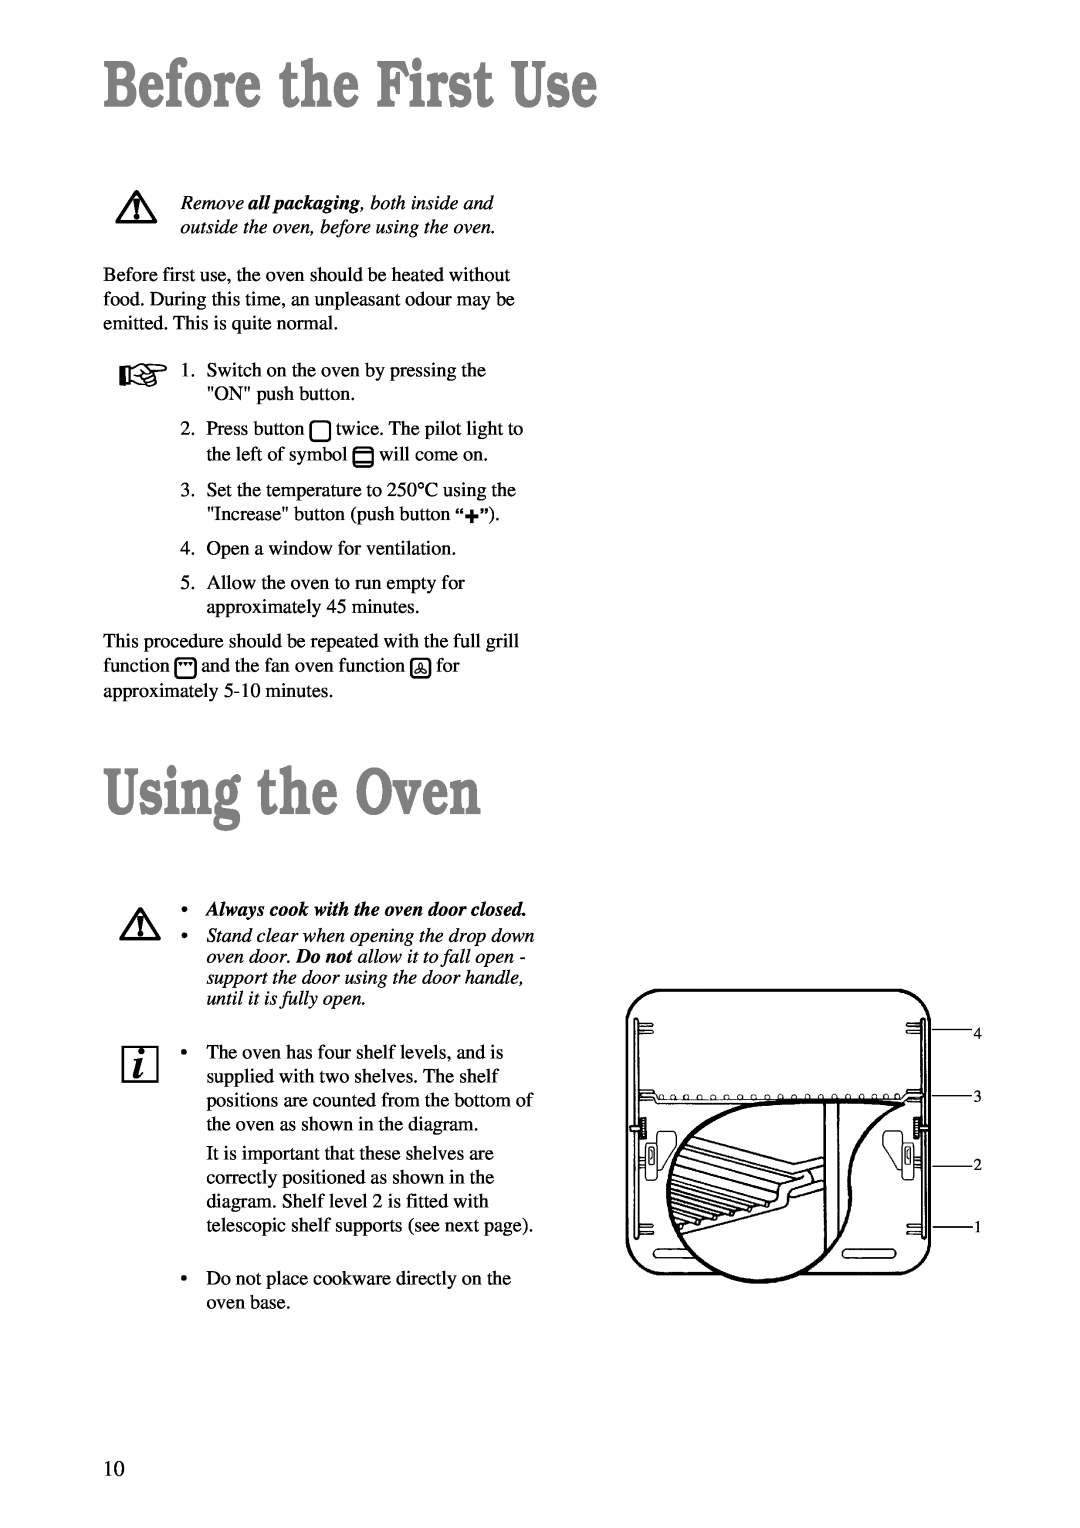 Zanussi ZBM 878 manual Before the First Use, Using the Oven, Always cook with the oven door closed 